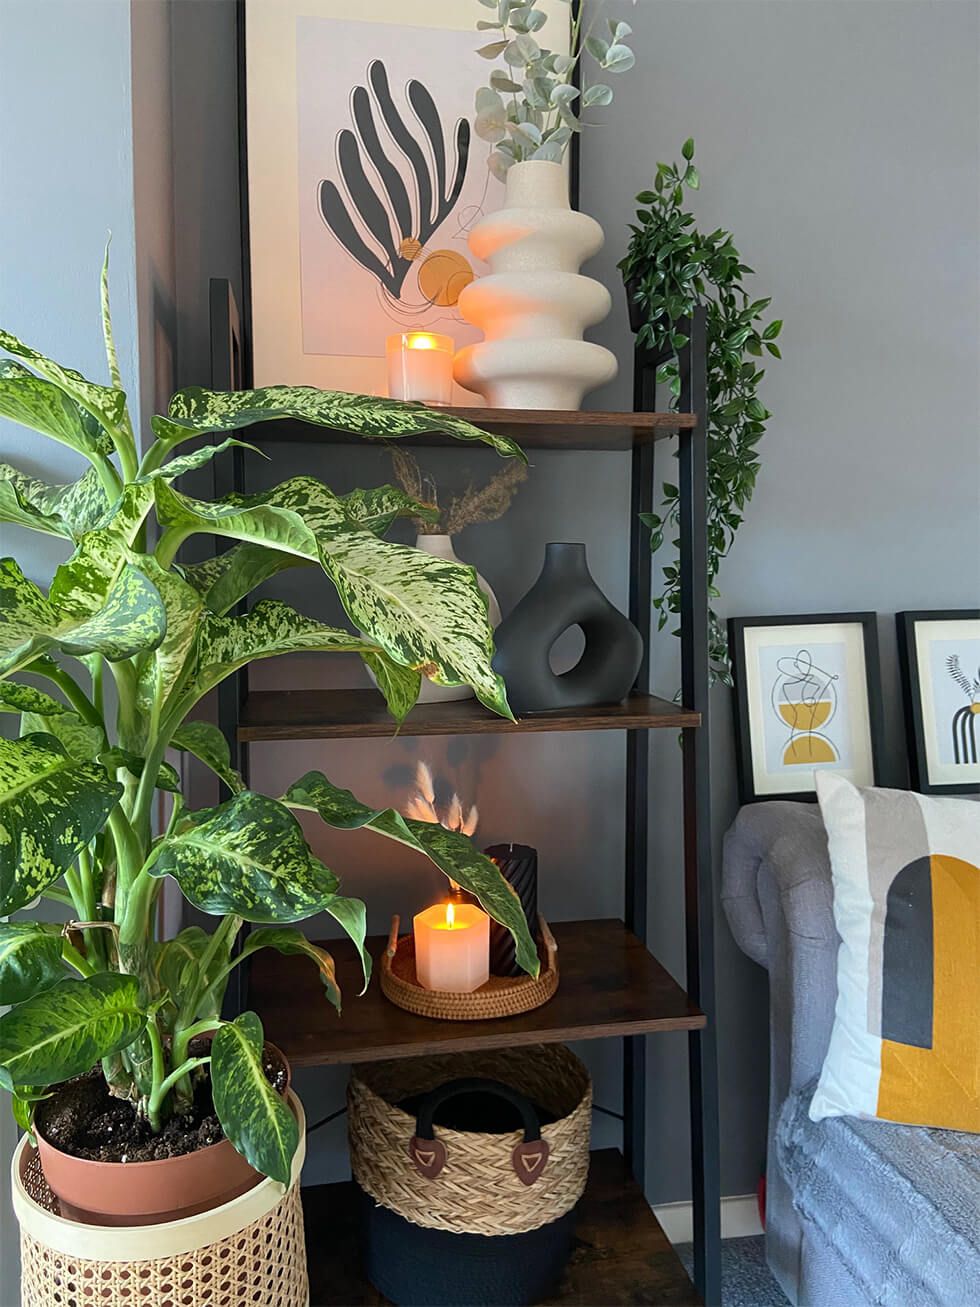 A shelving unit with vases and artwork next to a potted plant